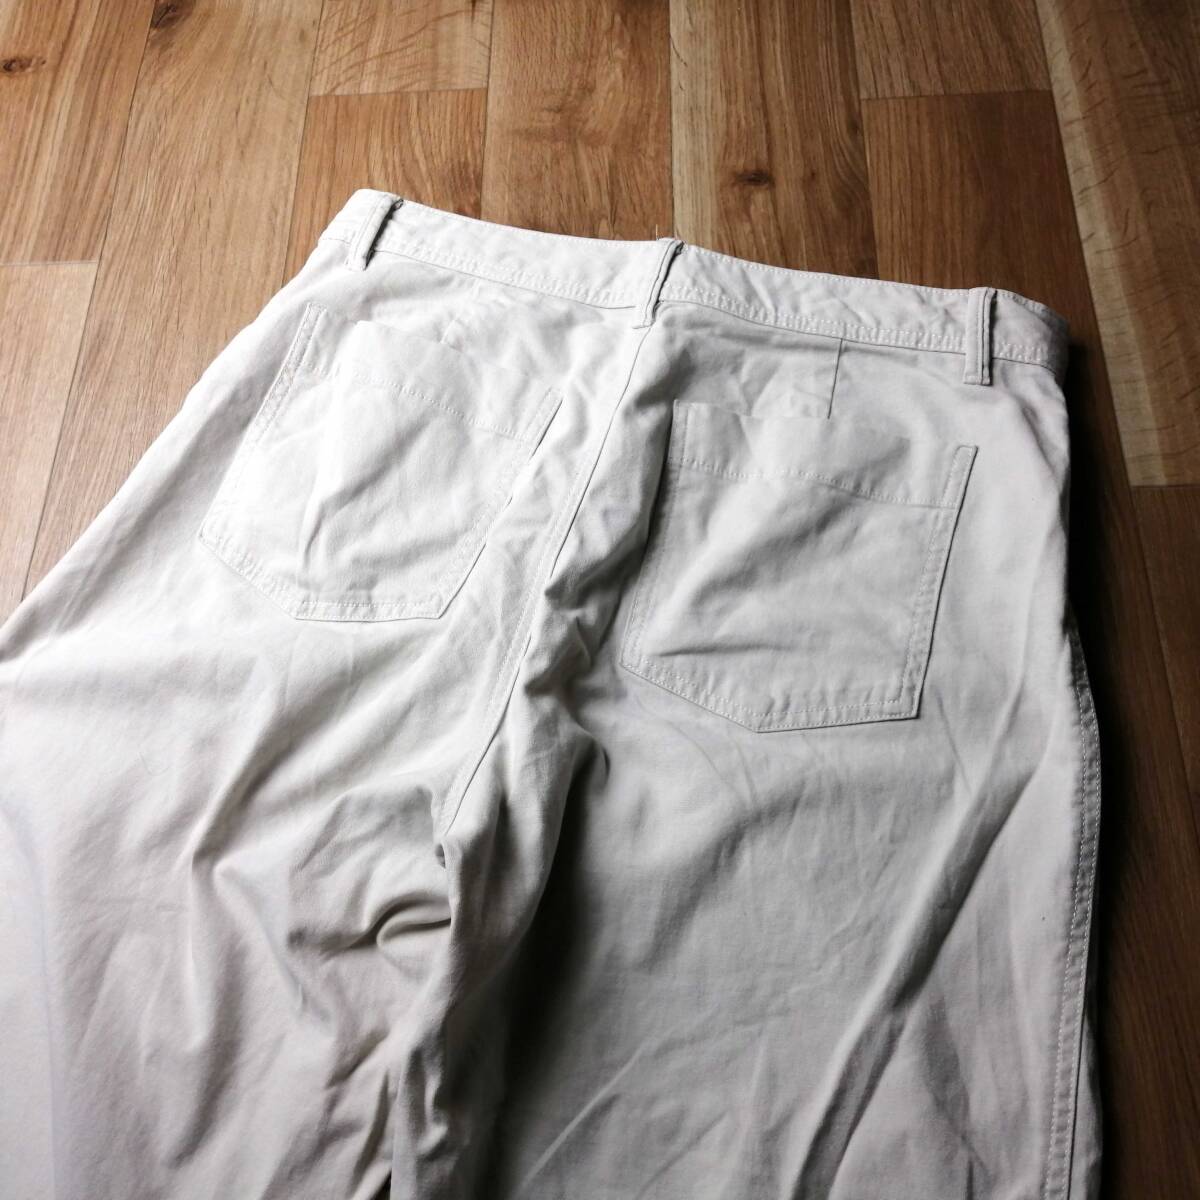 GAP Gap wide pants cotton pants size 12 24-0422fu05[4 point including in a package free shipping ]